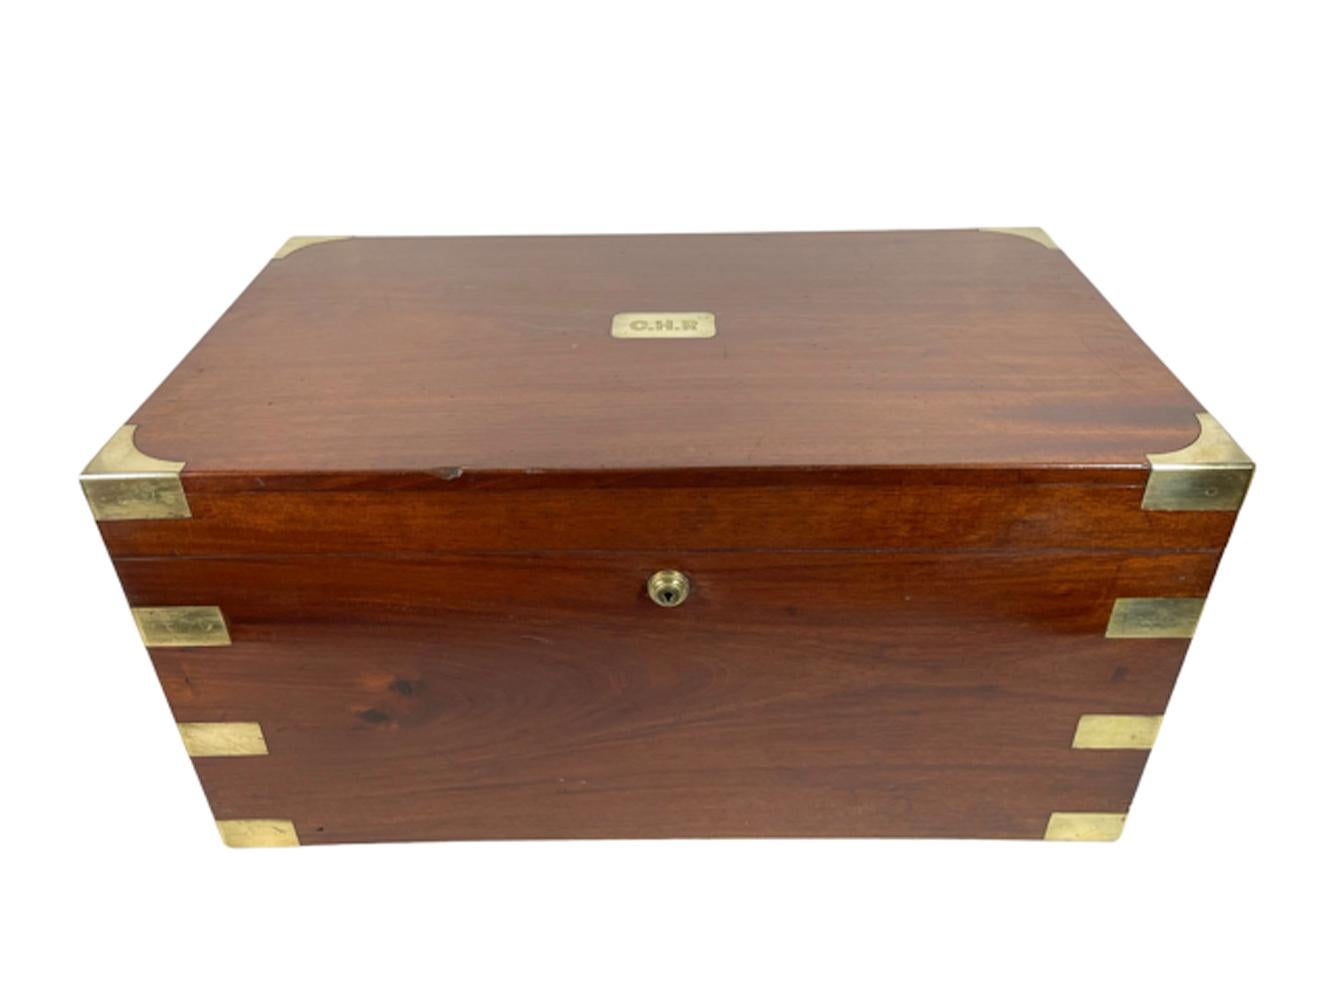 Early 20th Century Brass Mounted Mahogany Benson & Hedges Campaign Style Humidor For Sale 5